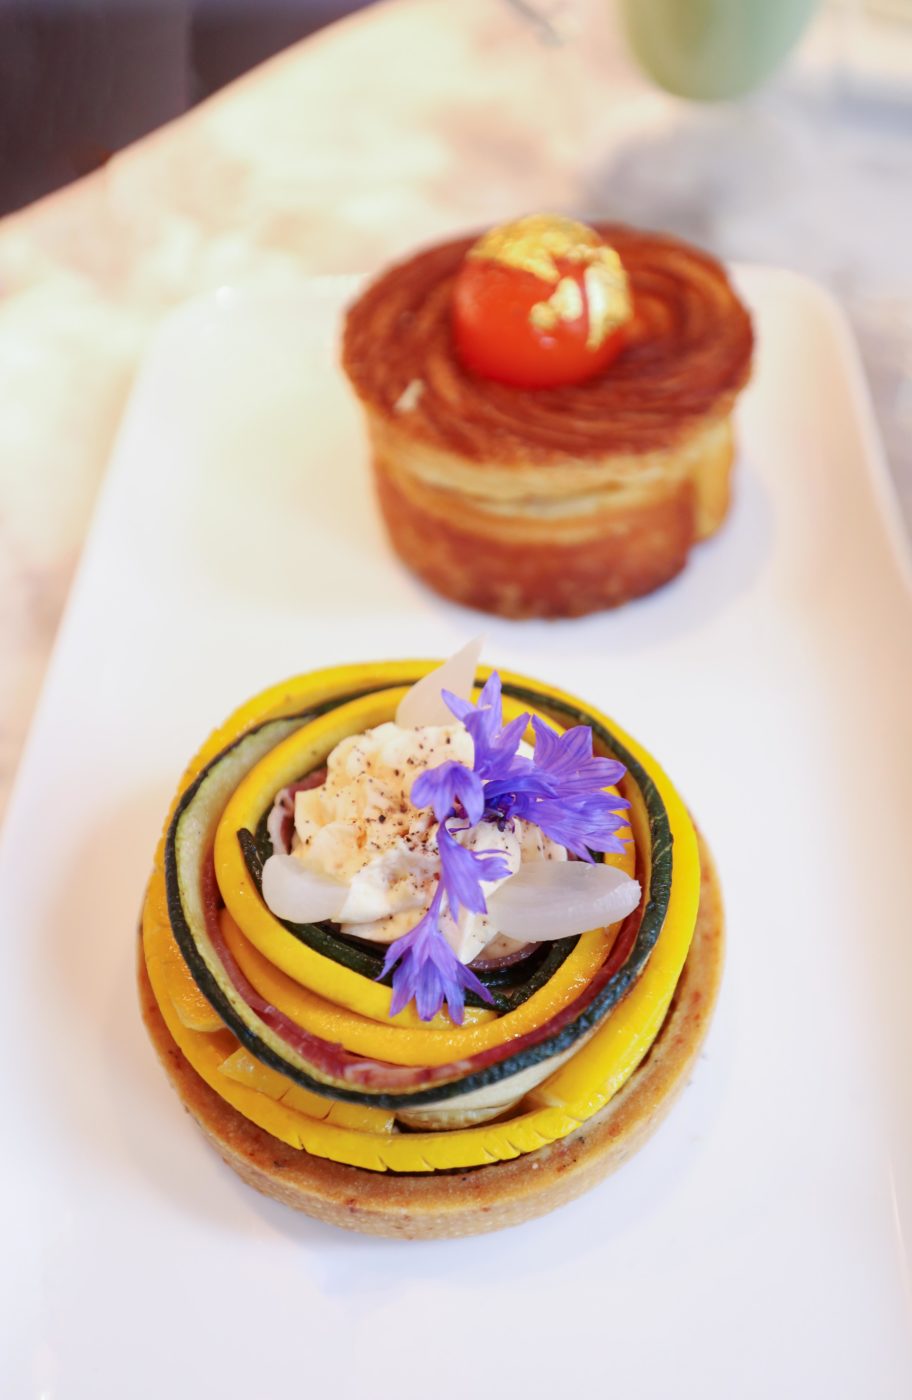 The Connaught Patisserie